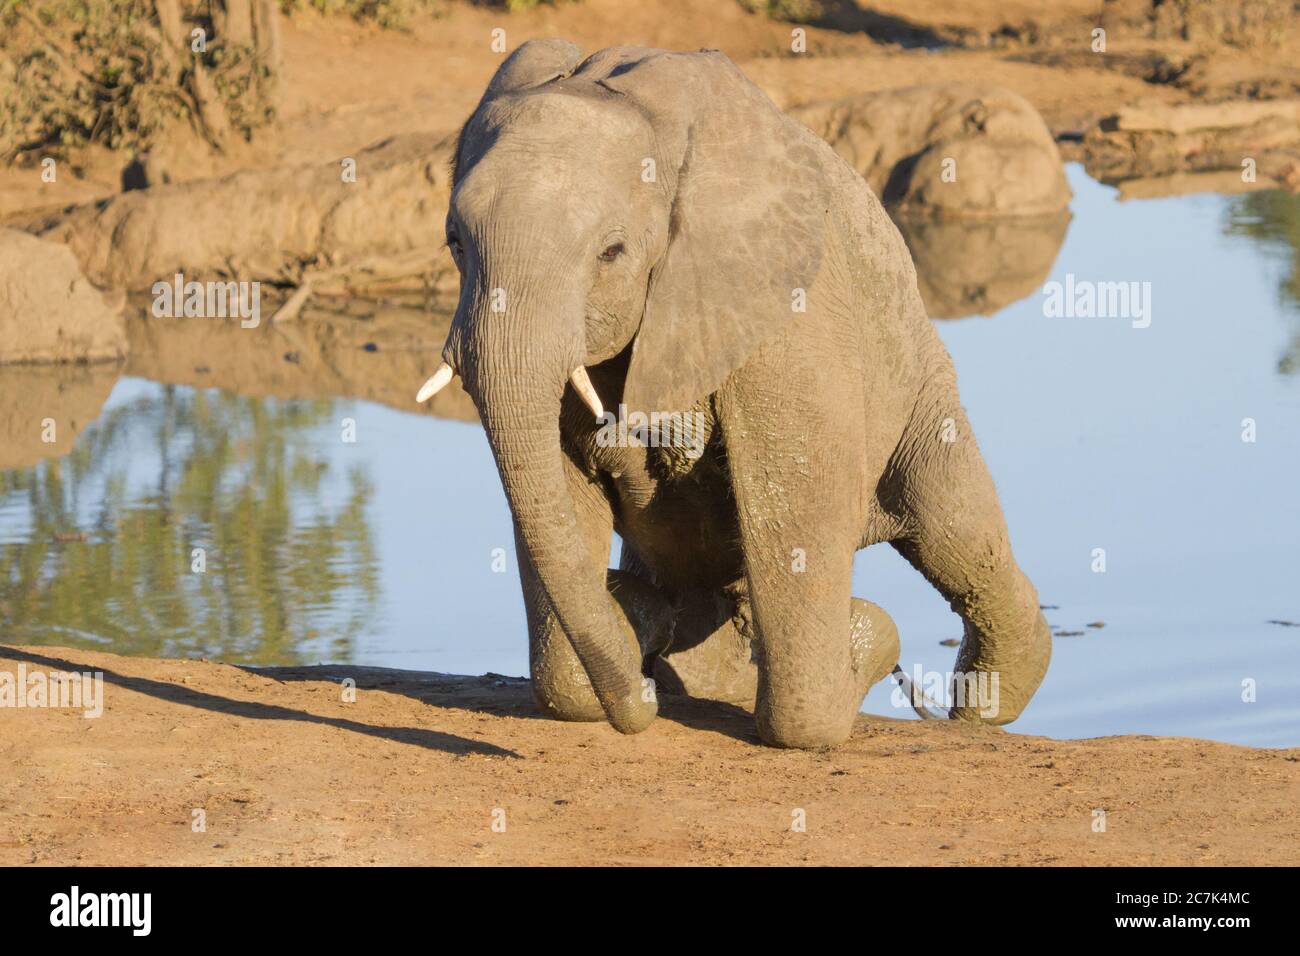 An African elephant struggling to climb out of a waterhole in Kruger, South Africa Stock Photo